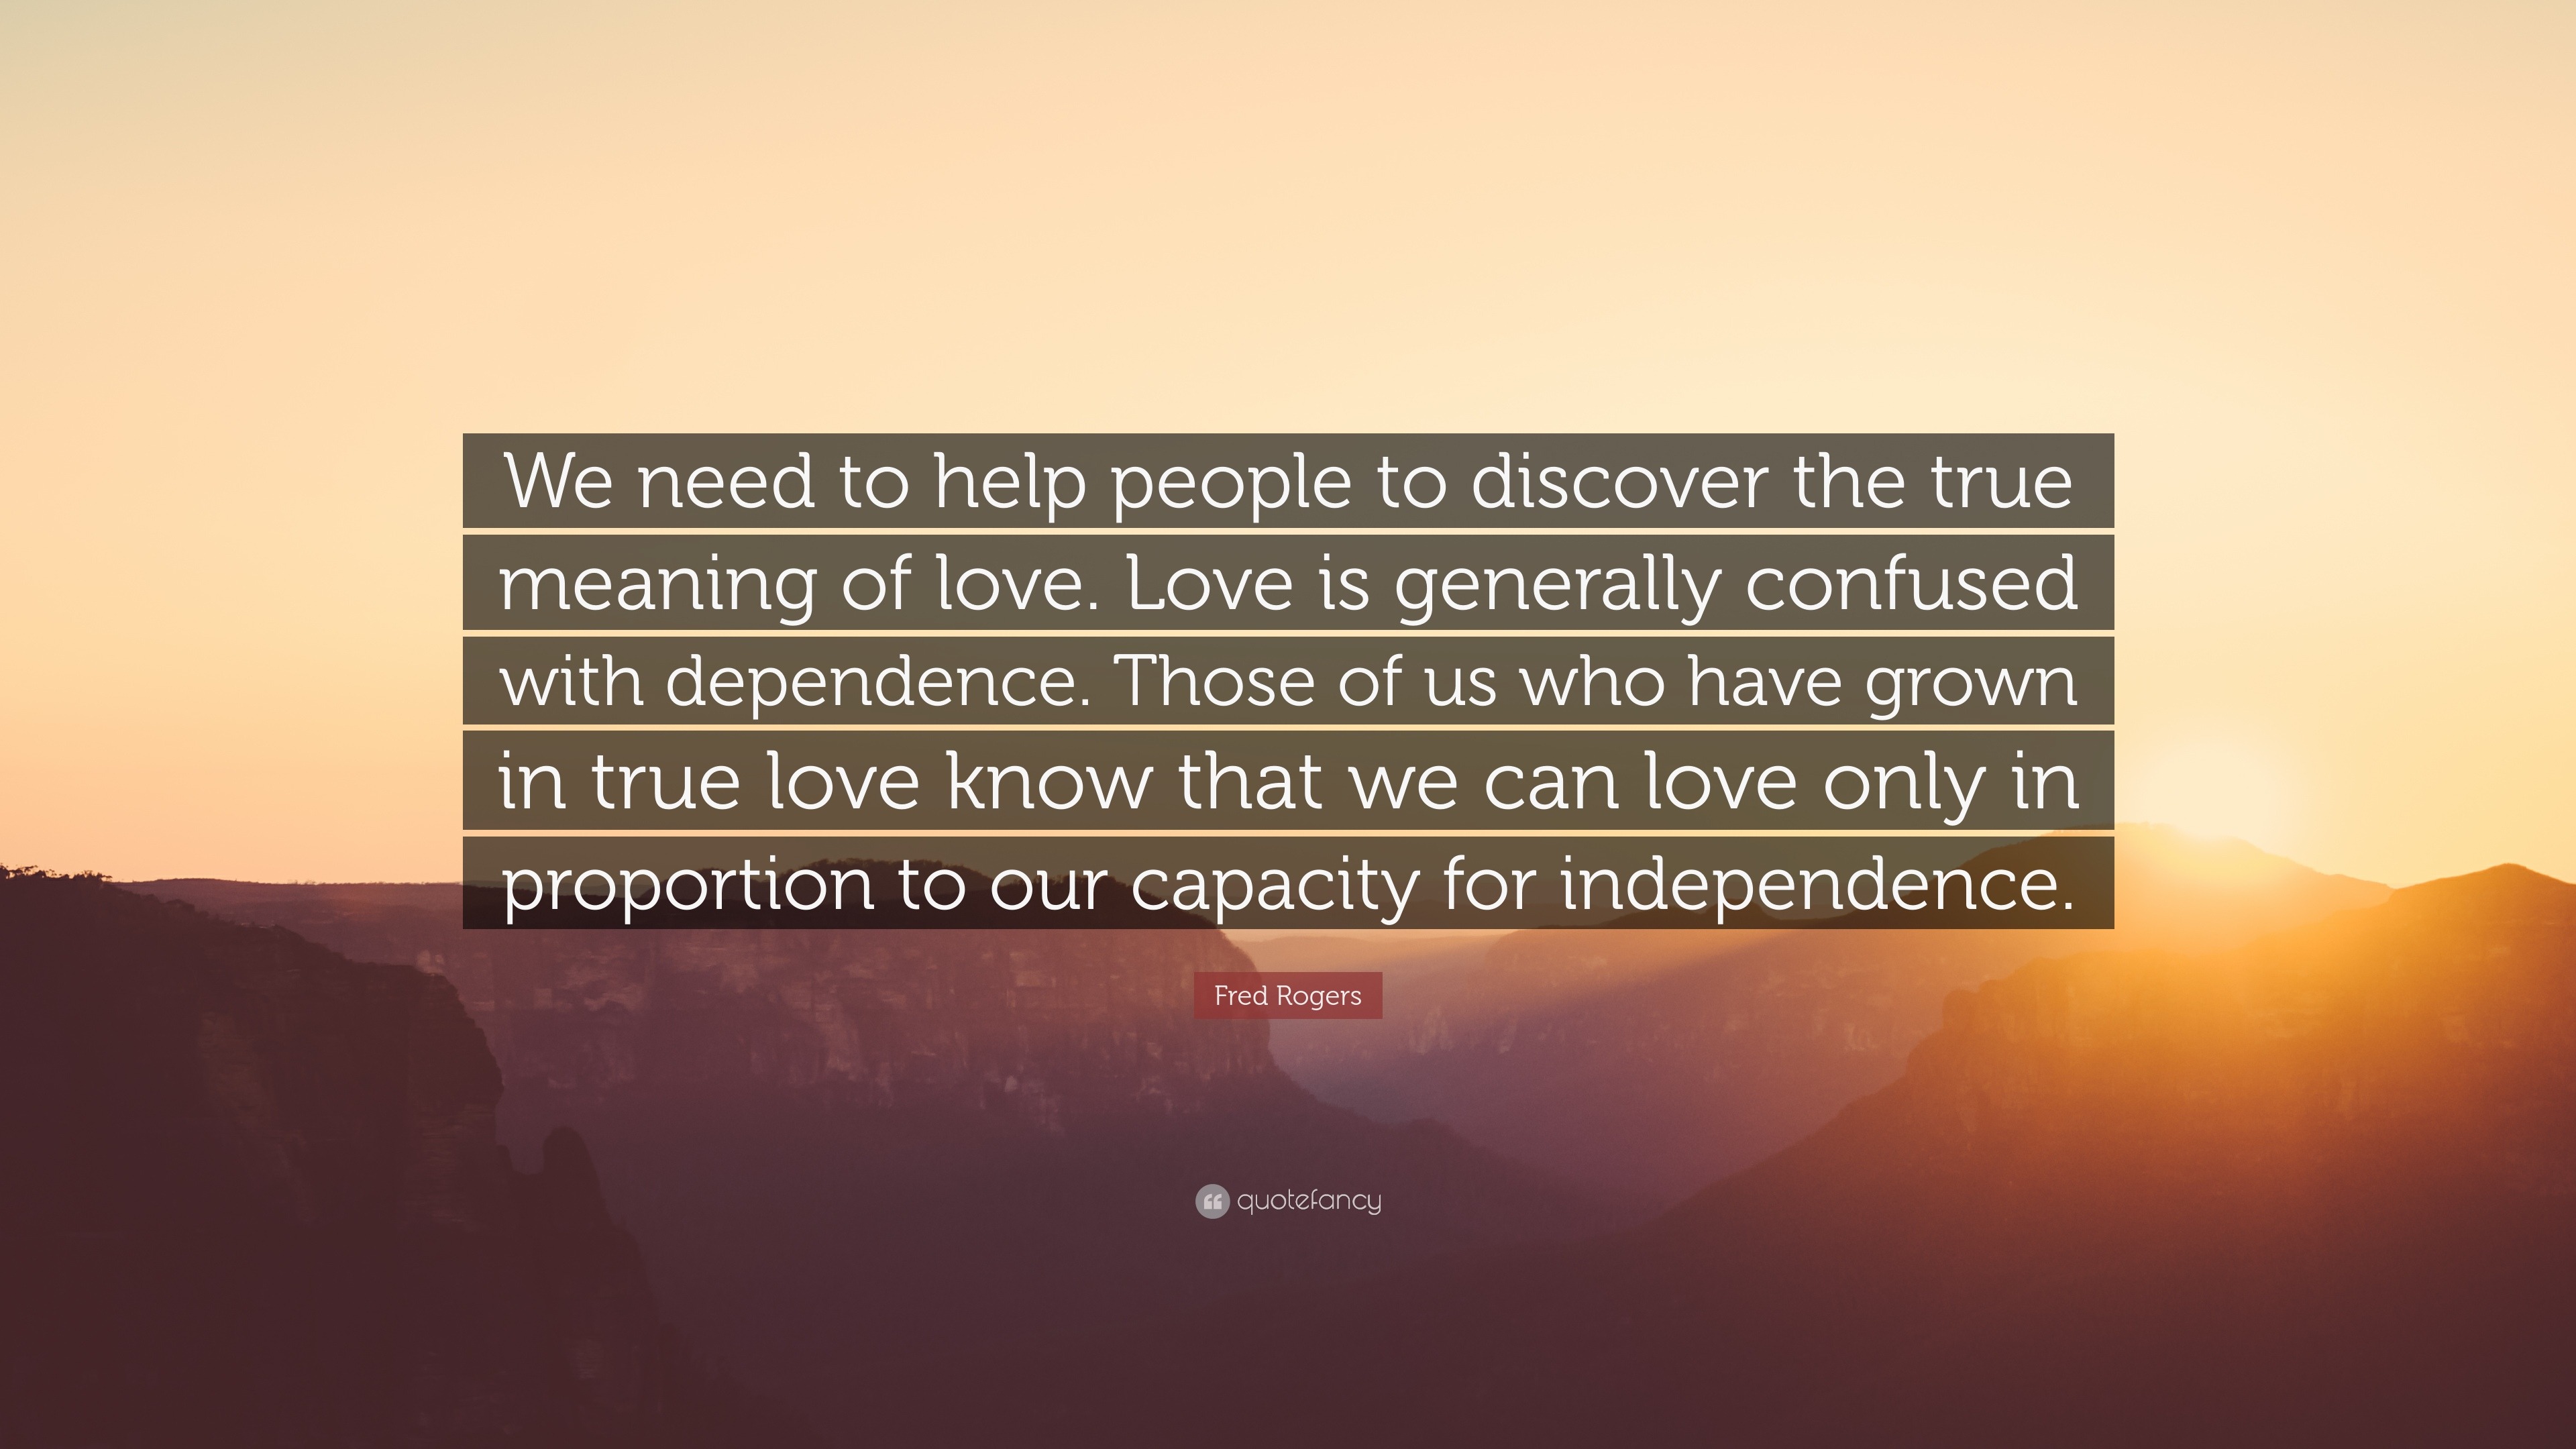 Fred Rogers Quote “We need to help people to discover the true meaning of